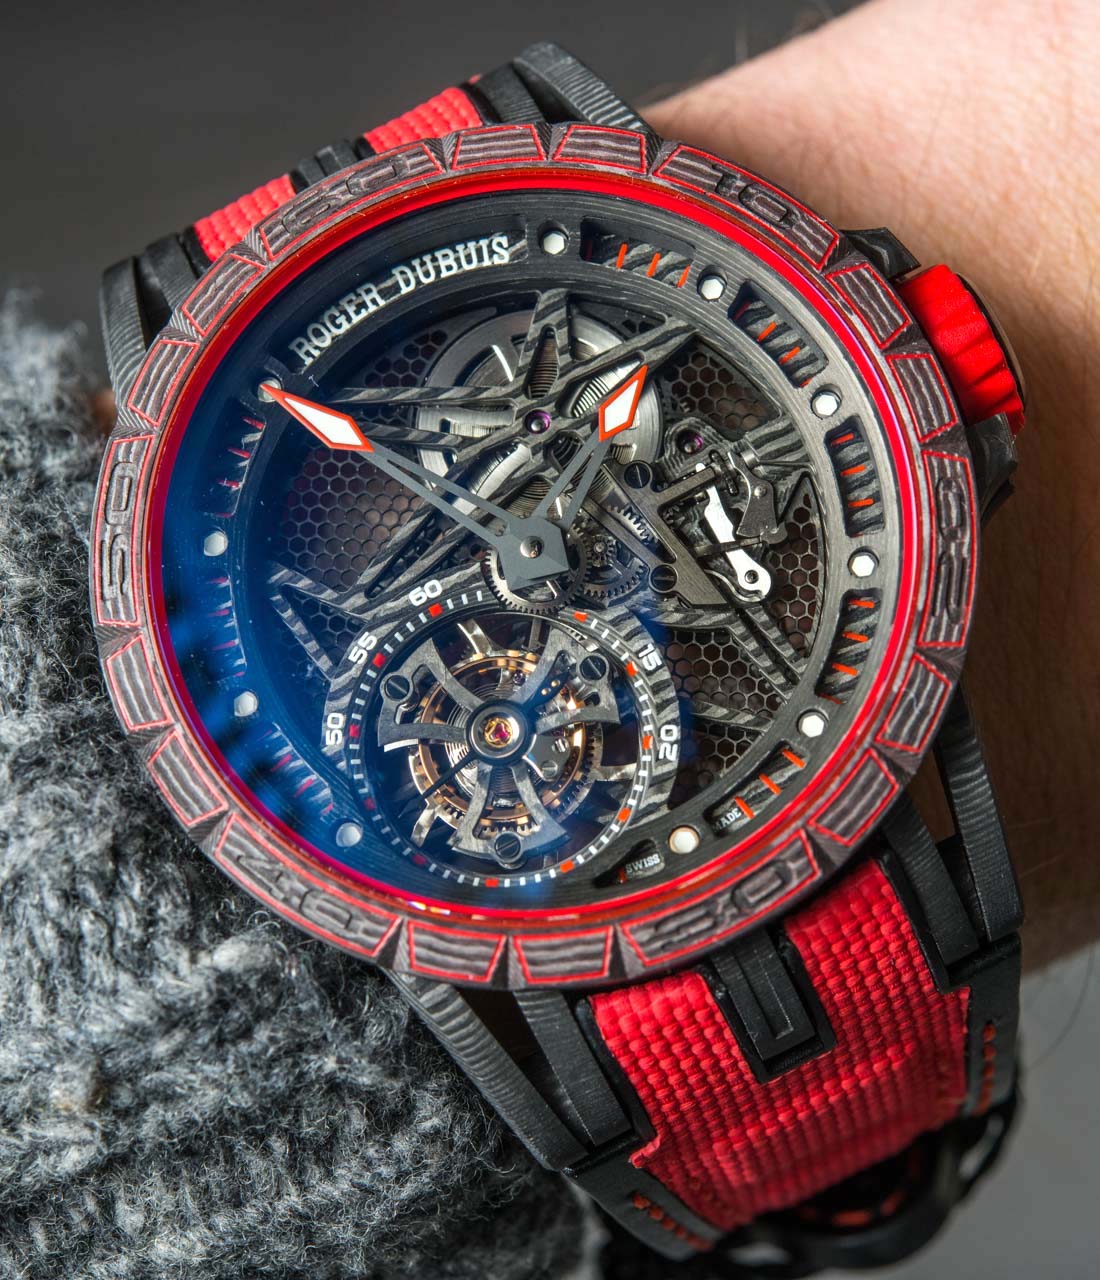 Roger Dubuis Excalibur Carbon Spider Watch Hands-On Hands-On 